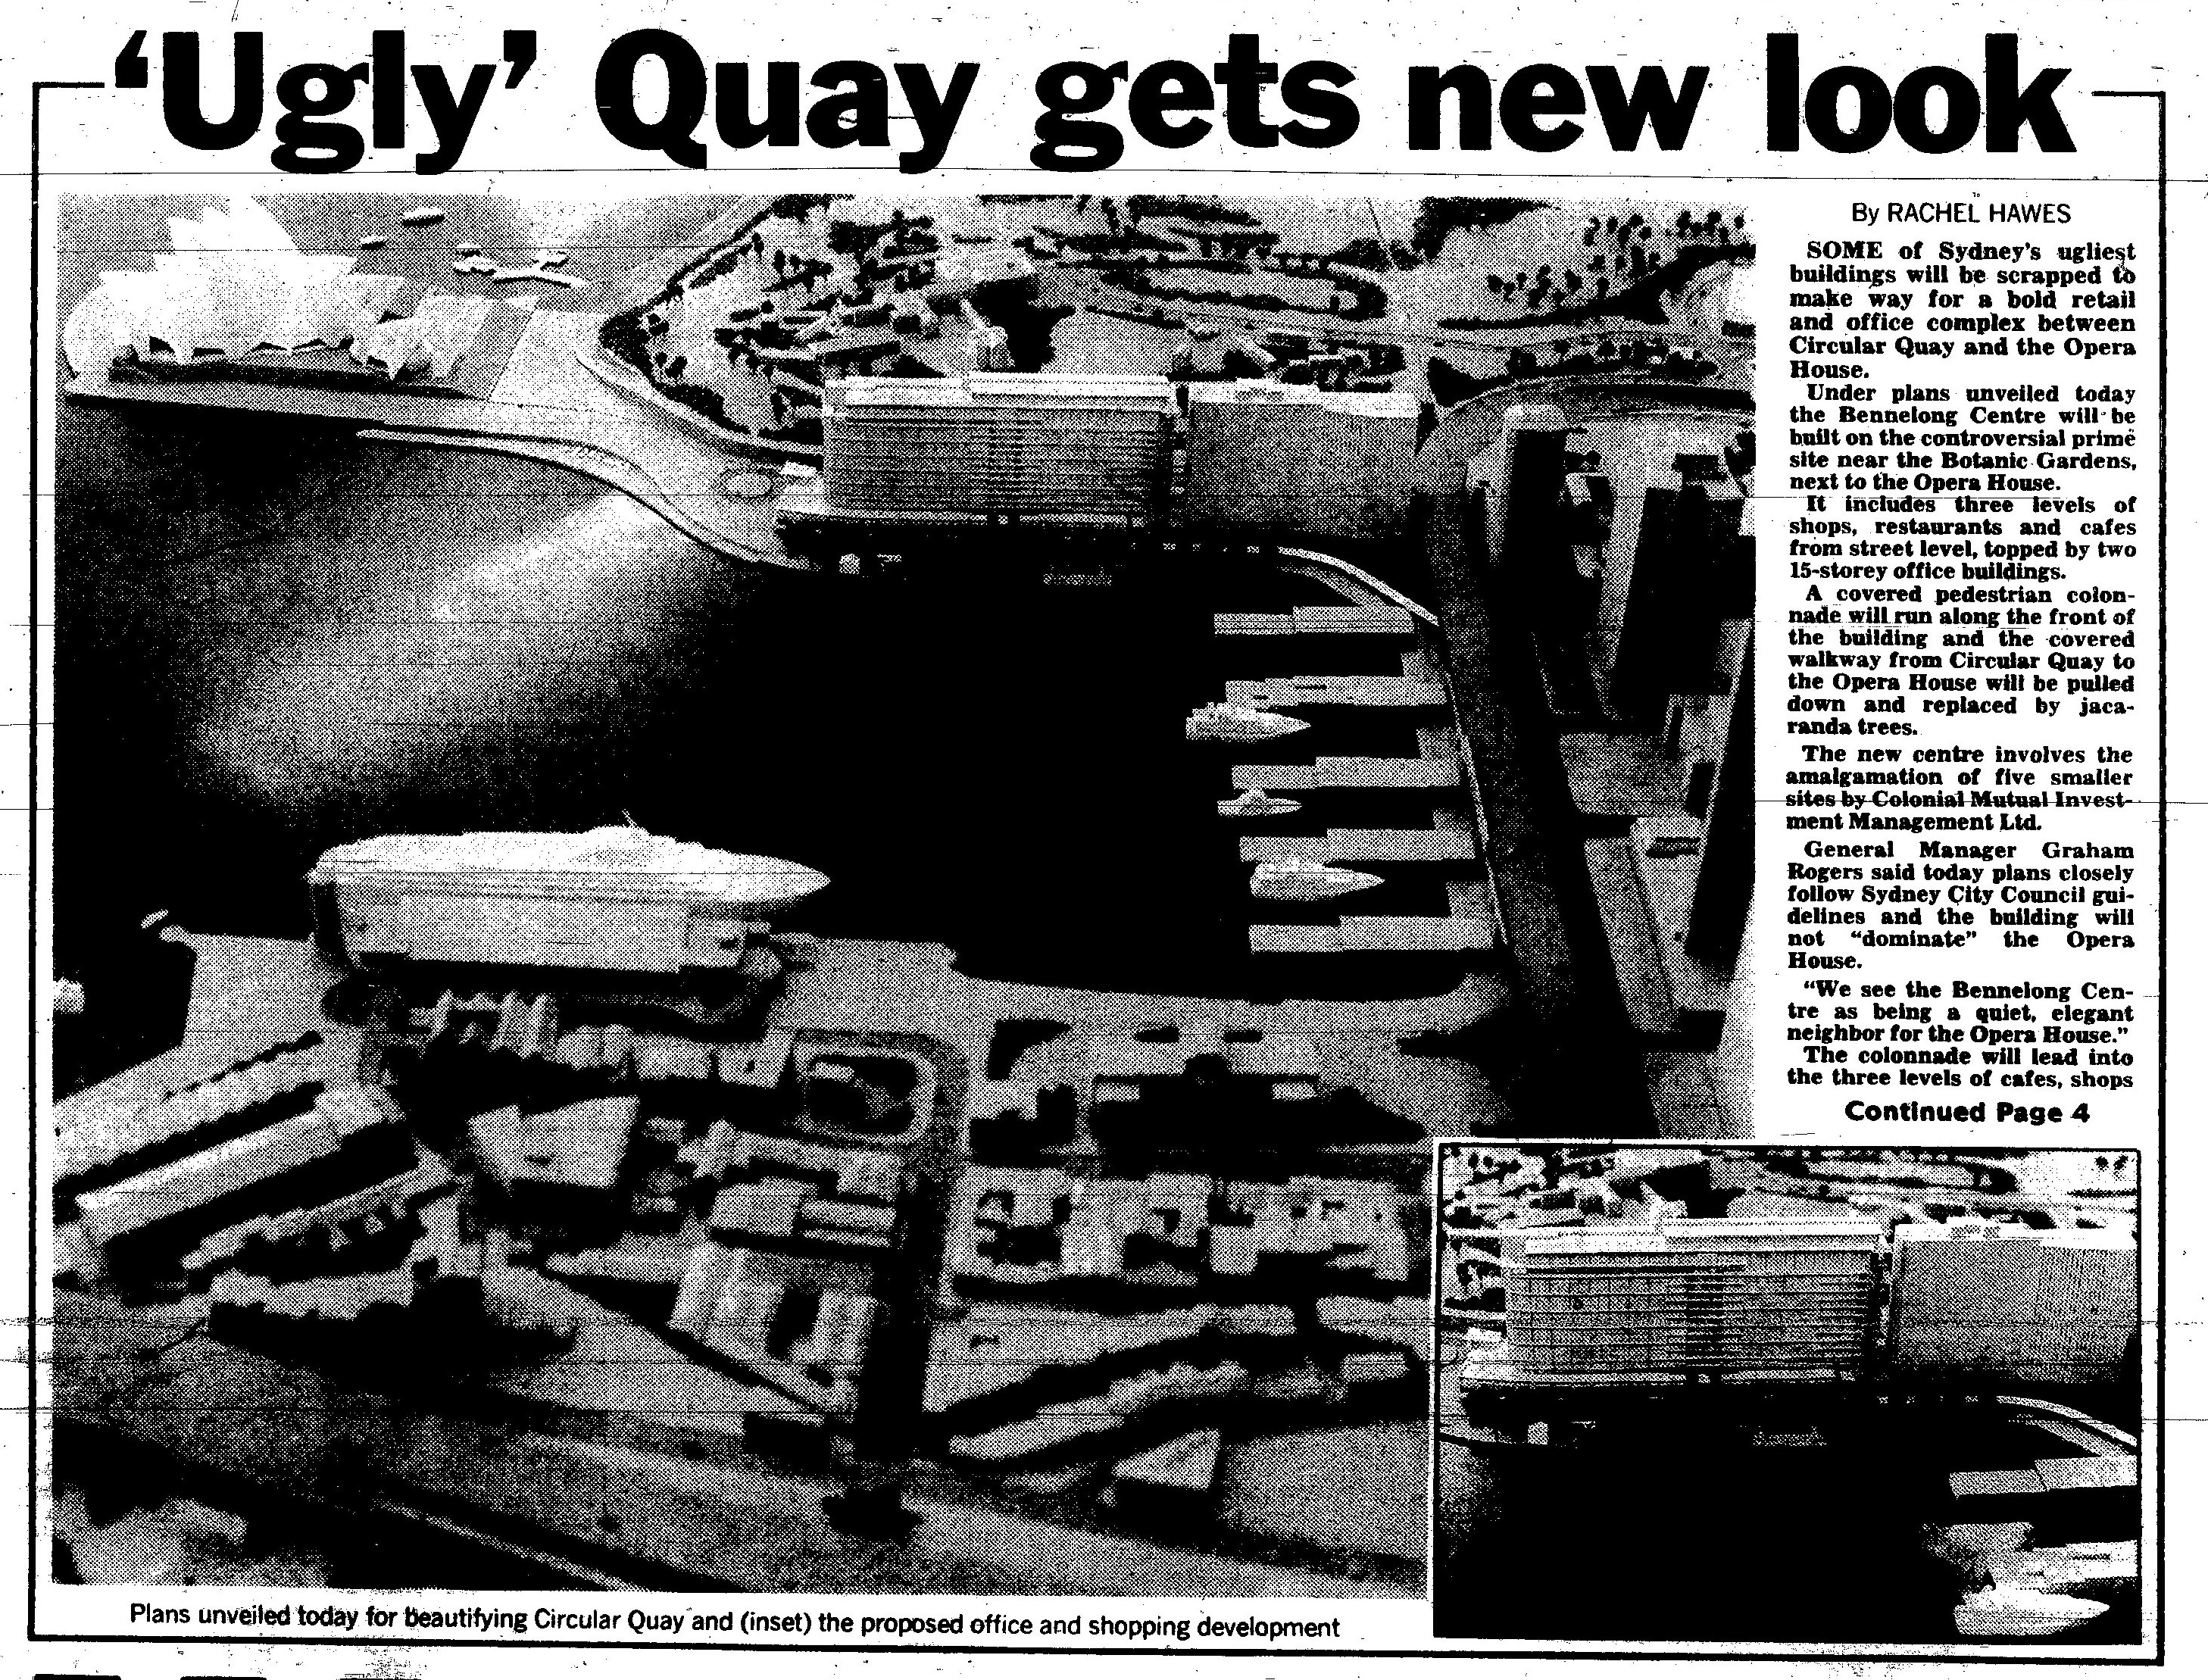 East Circular Quay June 27 1991 daily telegraph 1 and 4 (1) enlarged